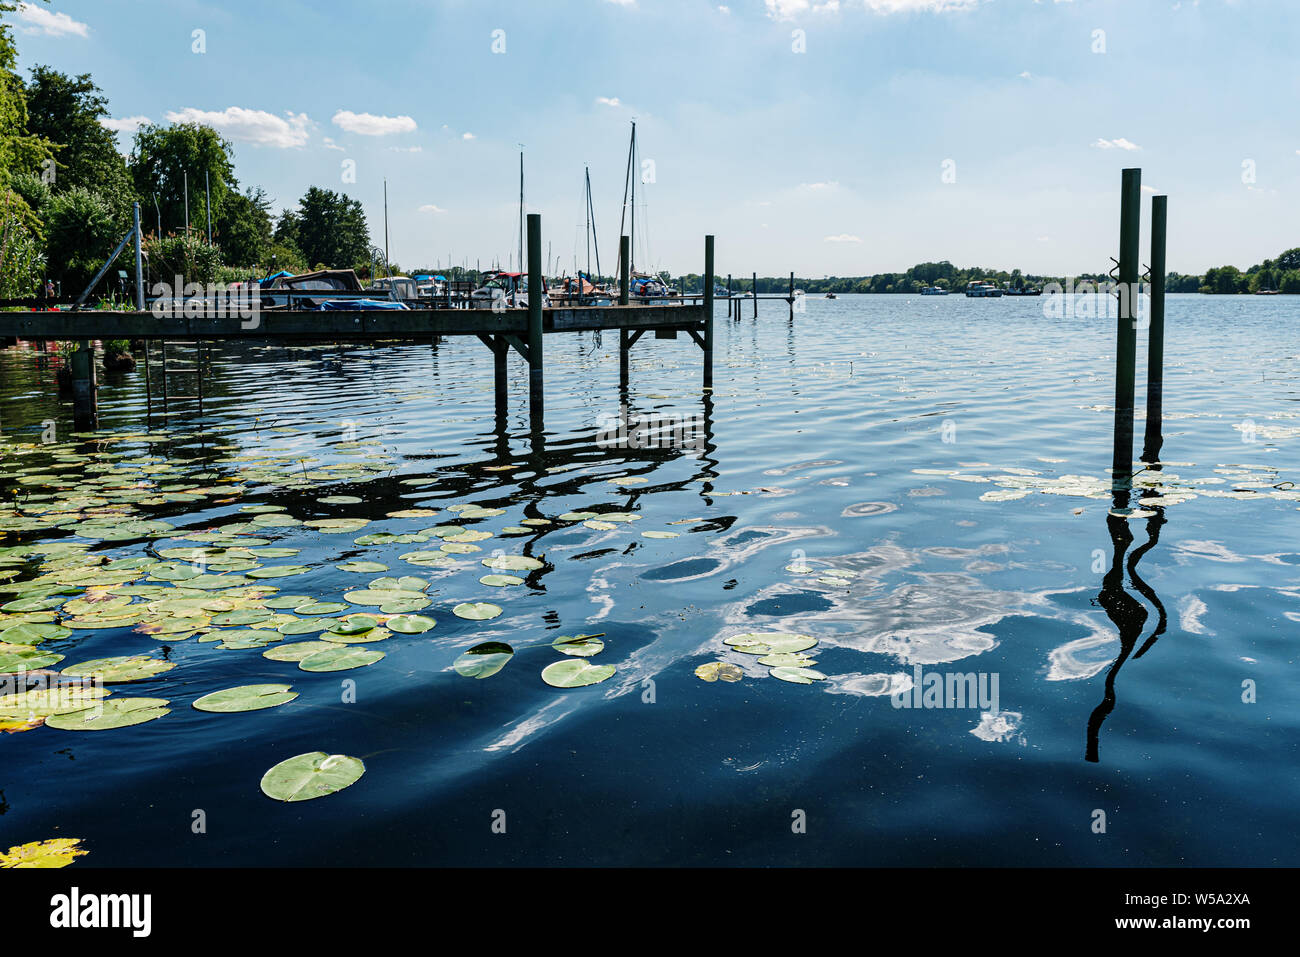 water lilies on Havel River near Heiligensee, Berlin, against blue summer sky Stock Photo